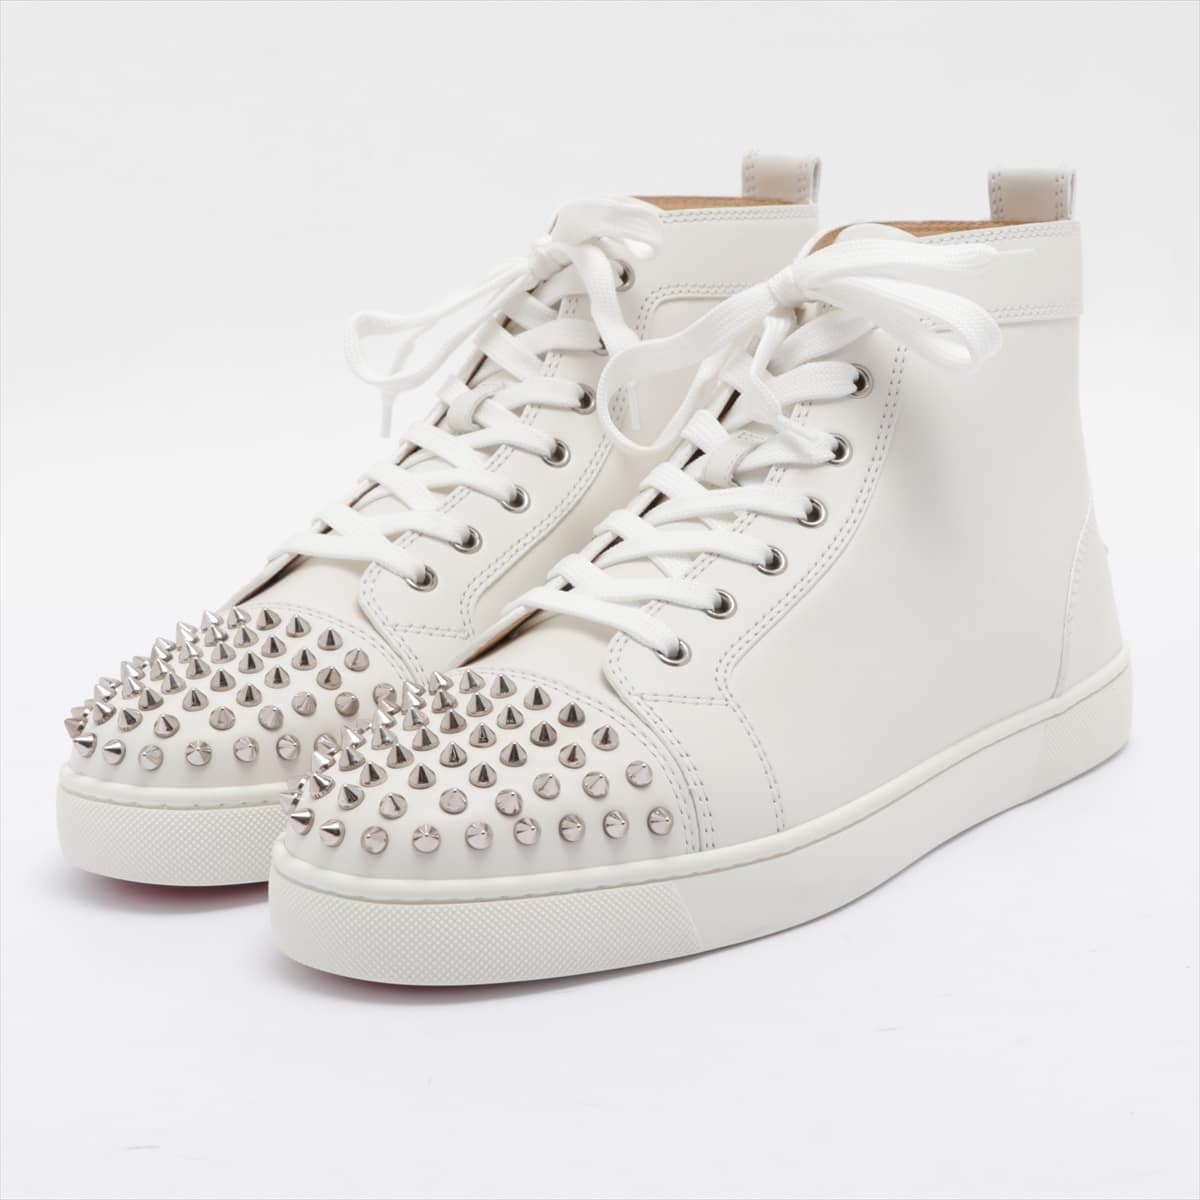 Christian Louboutin Leather High-top Sneakers 44 Men's White LOU SPIKES 1151061 Spike Studs